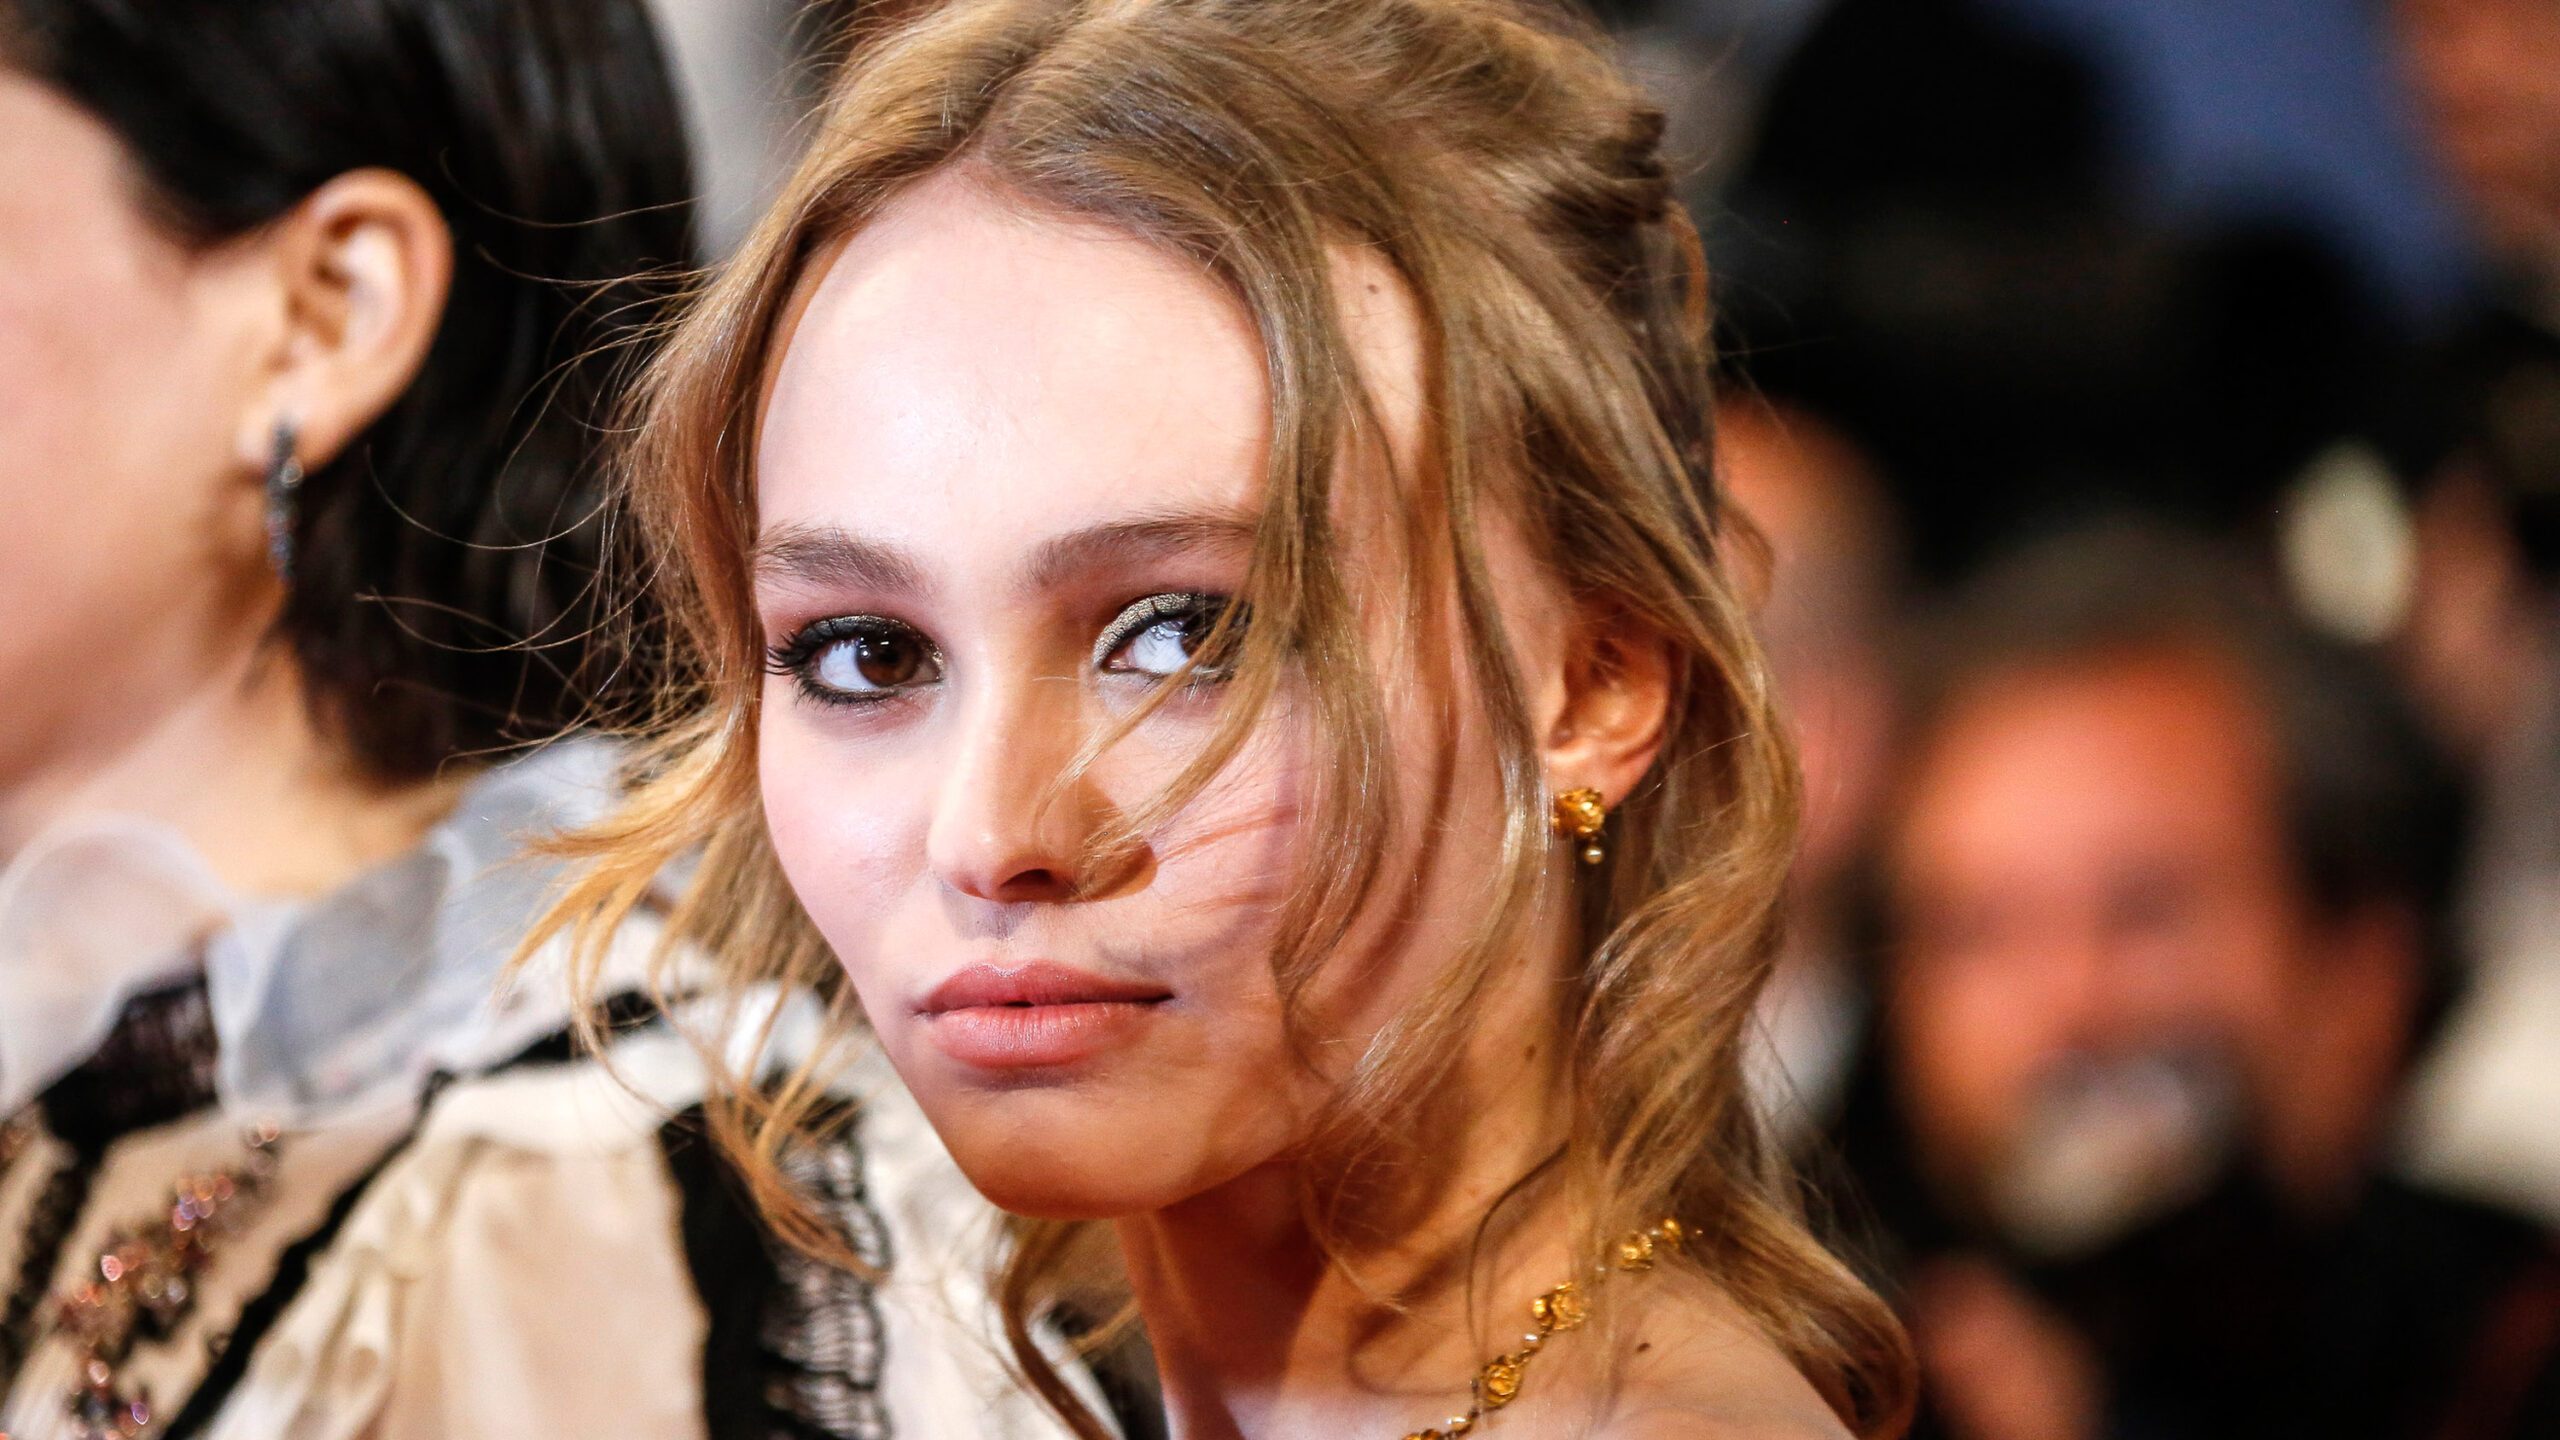 Lily-Rose Depp makes Cannes debut to mixed reviews